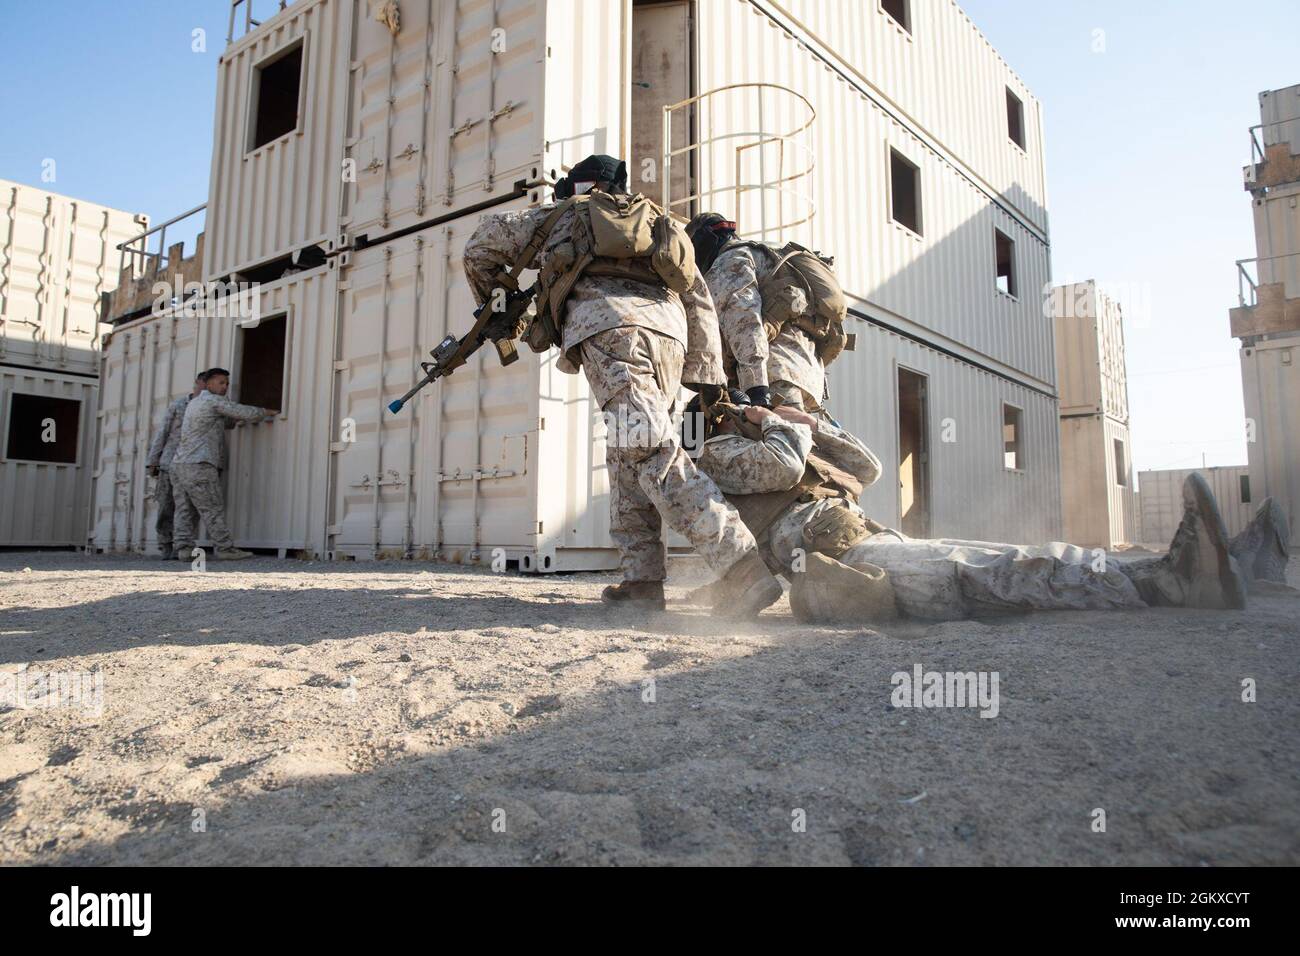 U.S. Marines with Co. L, 3rd Battalion, 4th Marine Regiment, 1st Marine Division, evacuate a simulated casualty during urban defensive training at Marine Corps Air Ground Combat Center Twentynine Palms, California, July 17, 2021. Marines with 7th Marine Regiment participated in various training exercises to compete for ‘best squad’ in preparation for Super Squad. Stock Photo